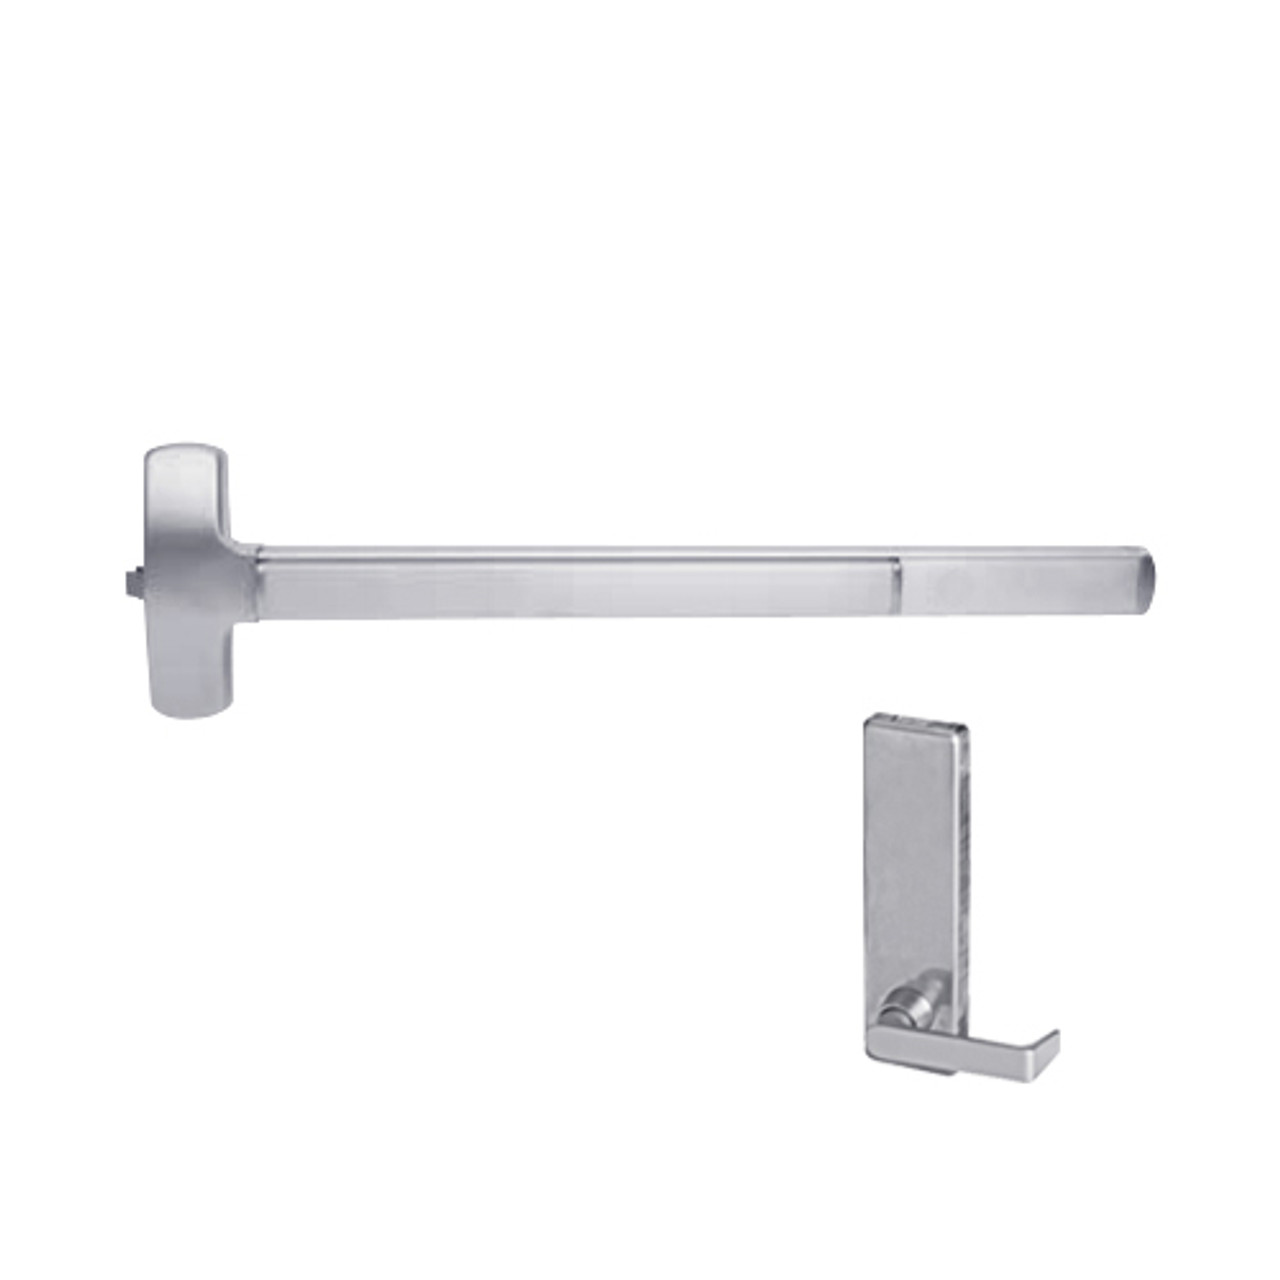 F-25-R-L-BE-DANE-US32-3-LHR Falcon Exit Device in Polished Stainless Steel